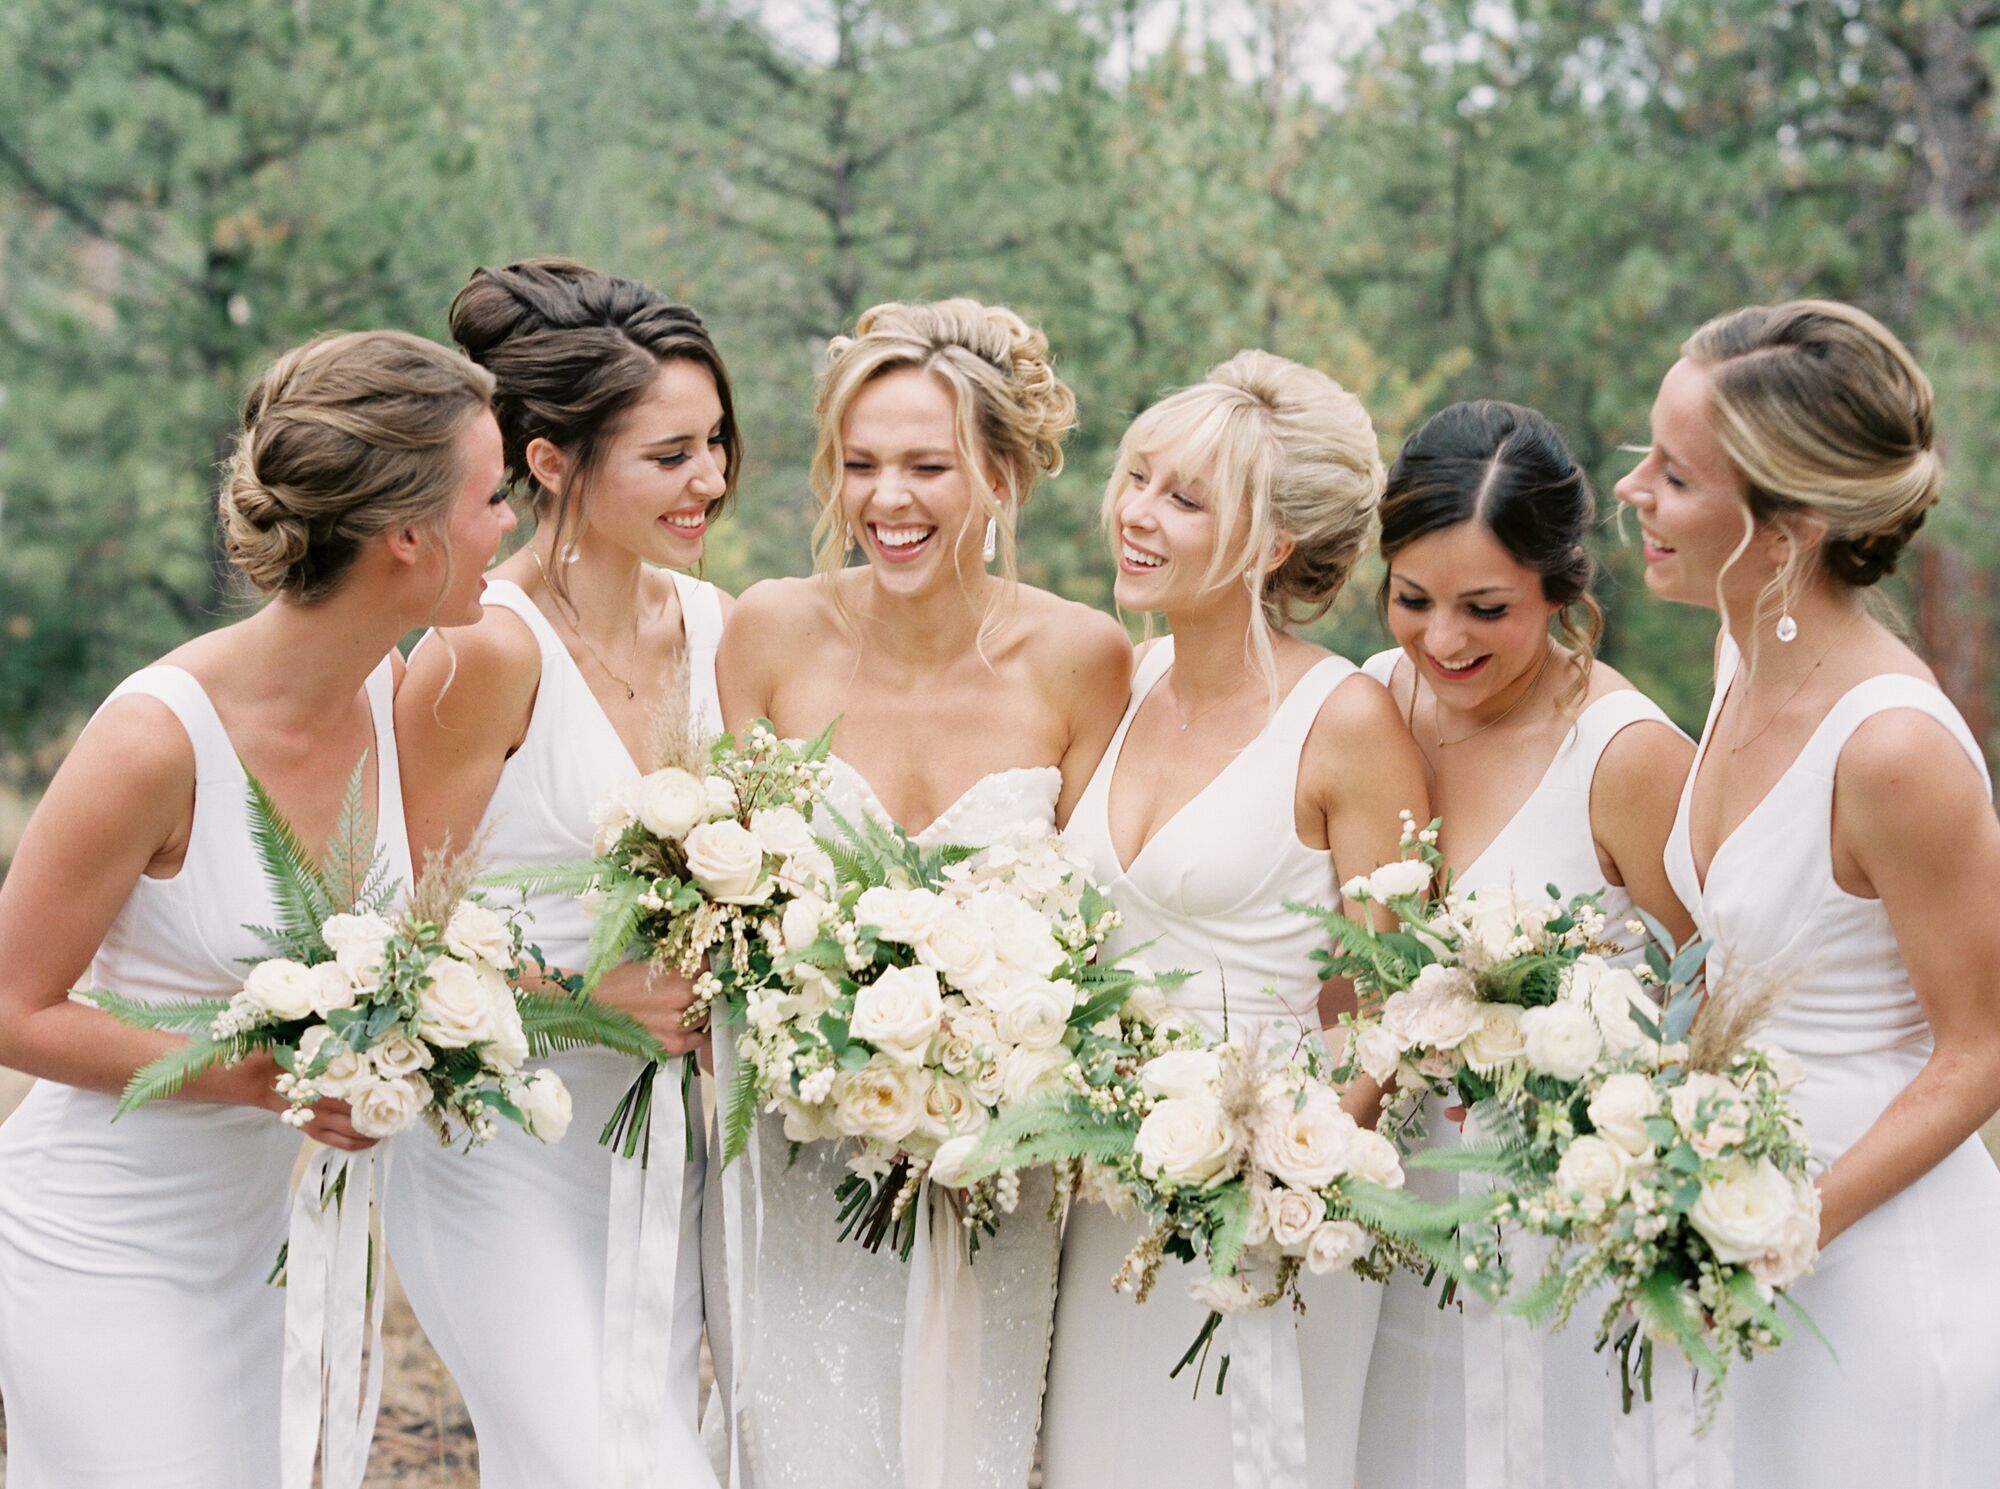 Sophisticated Yet Sexy Bridesmaid Dresses